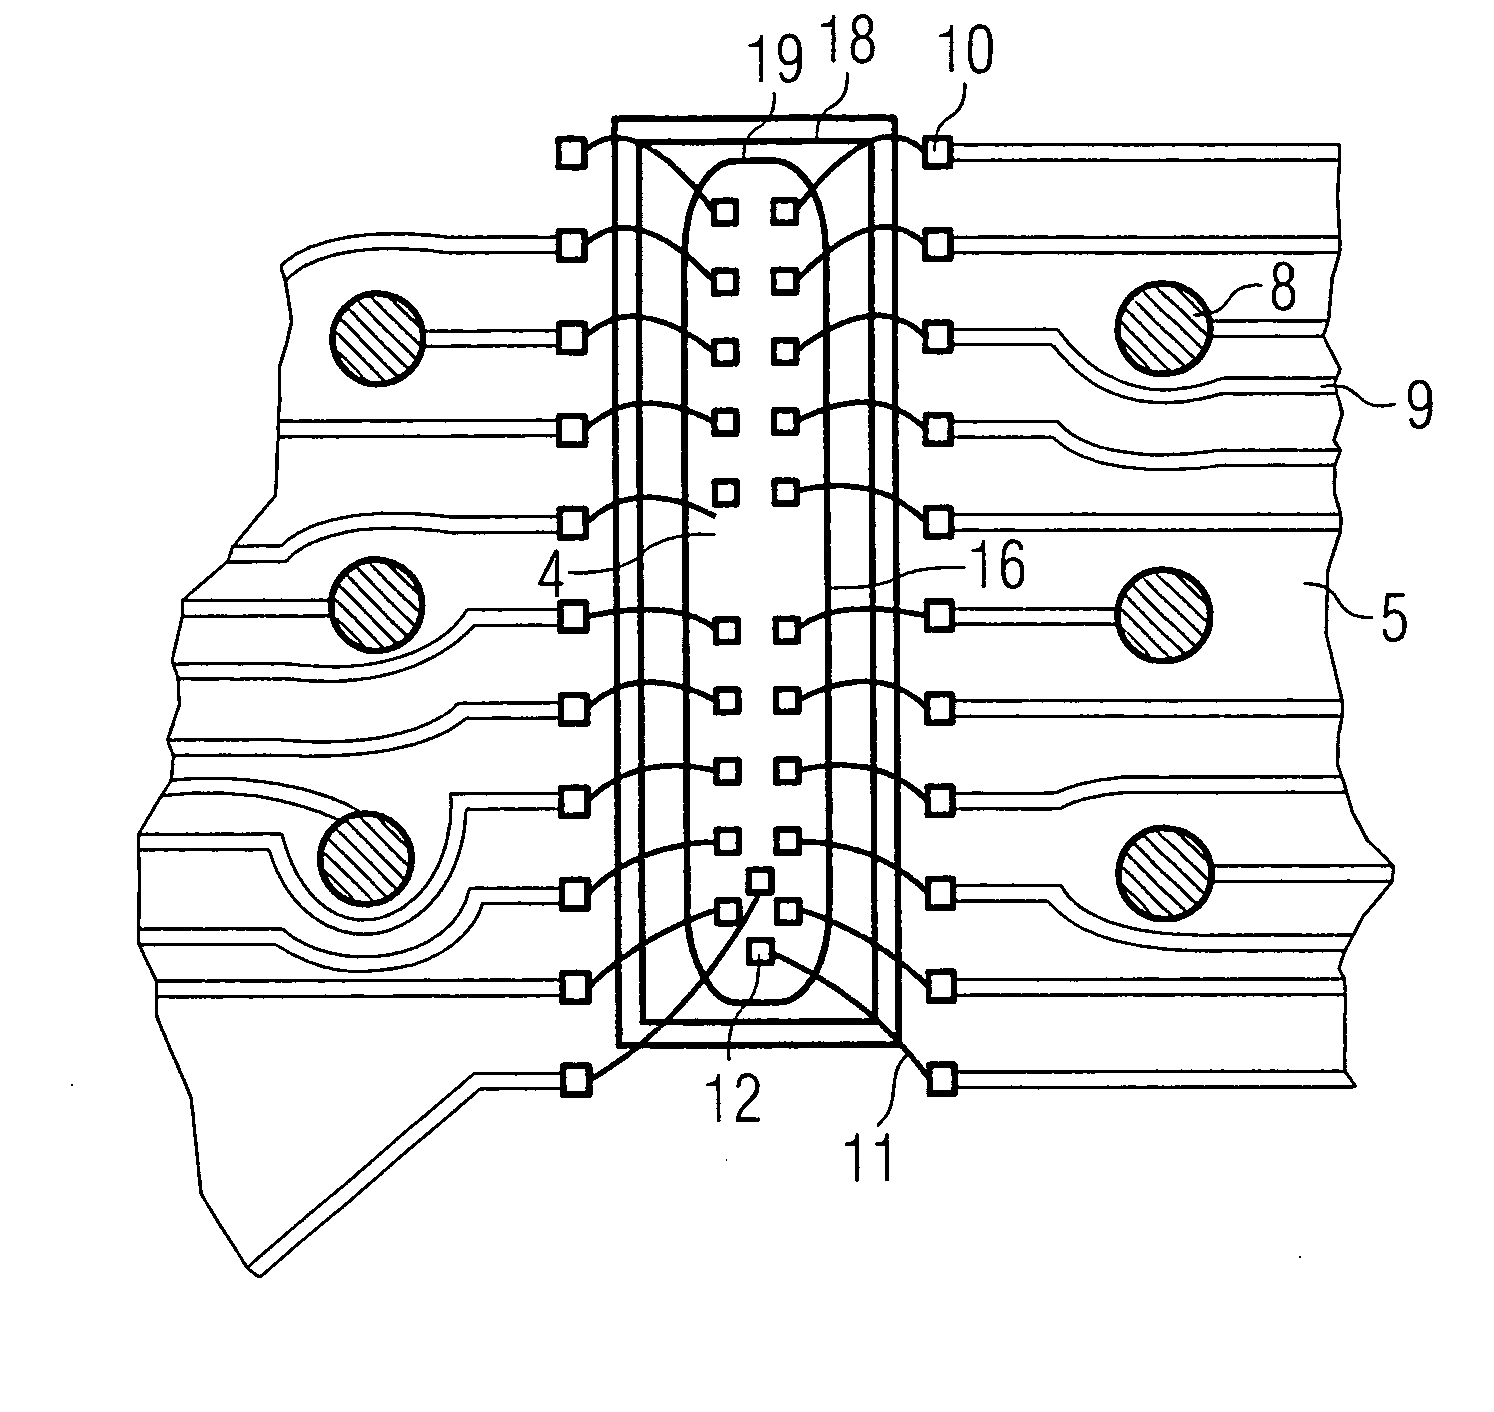 Substrate for an FBGA semiconductor component